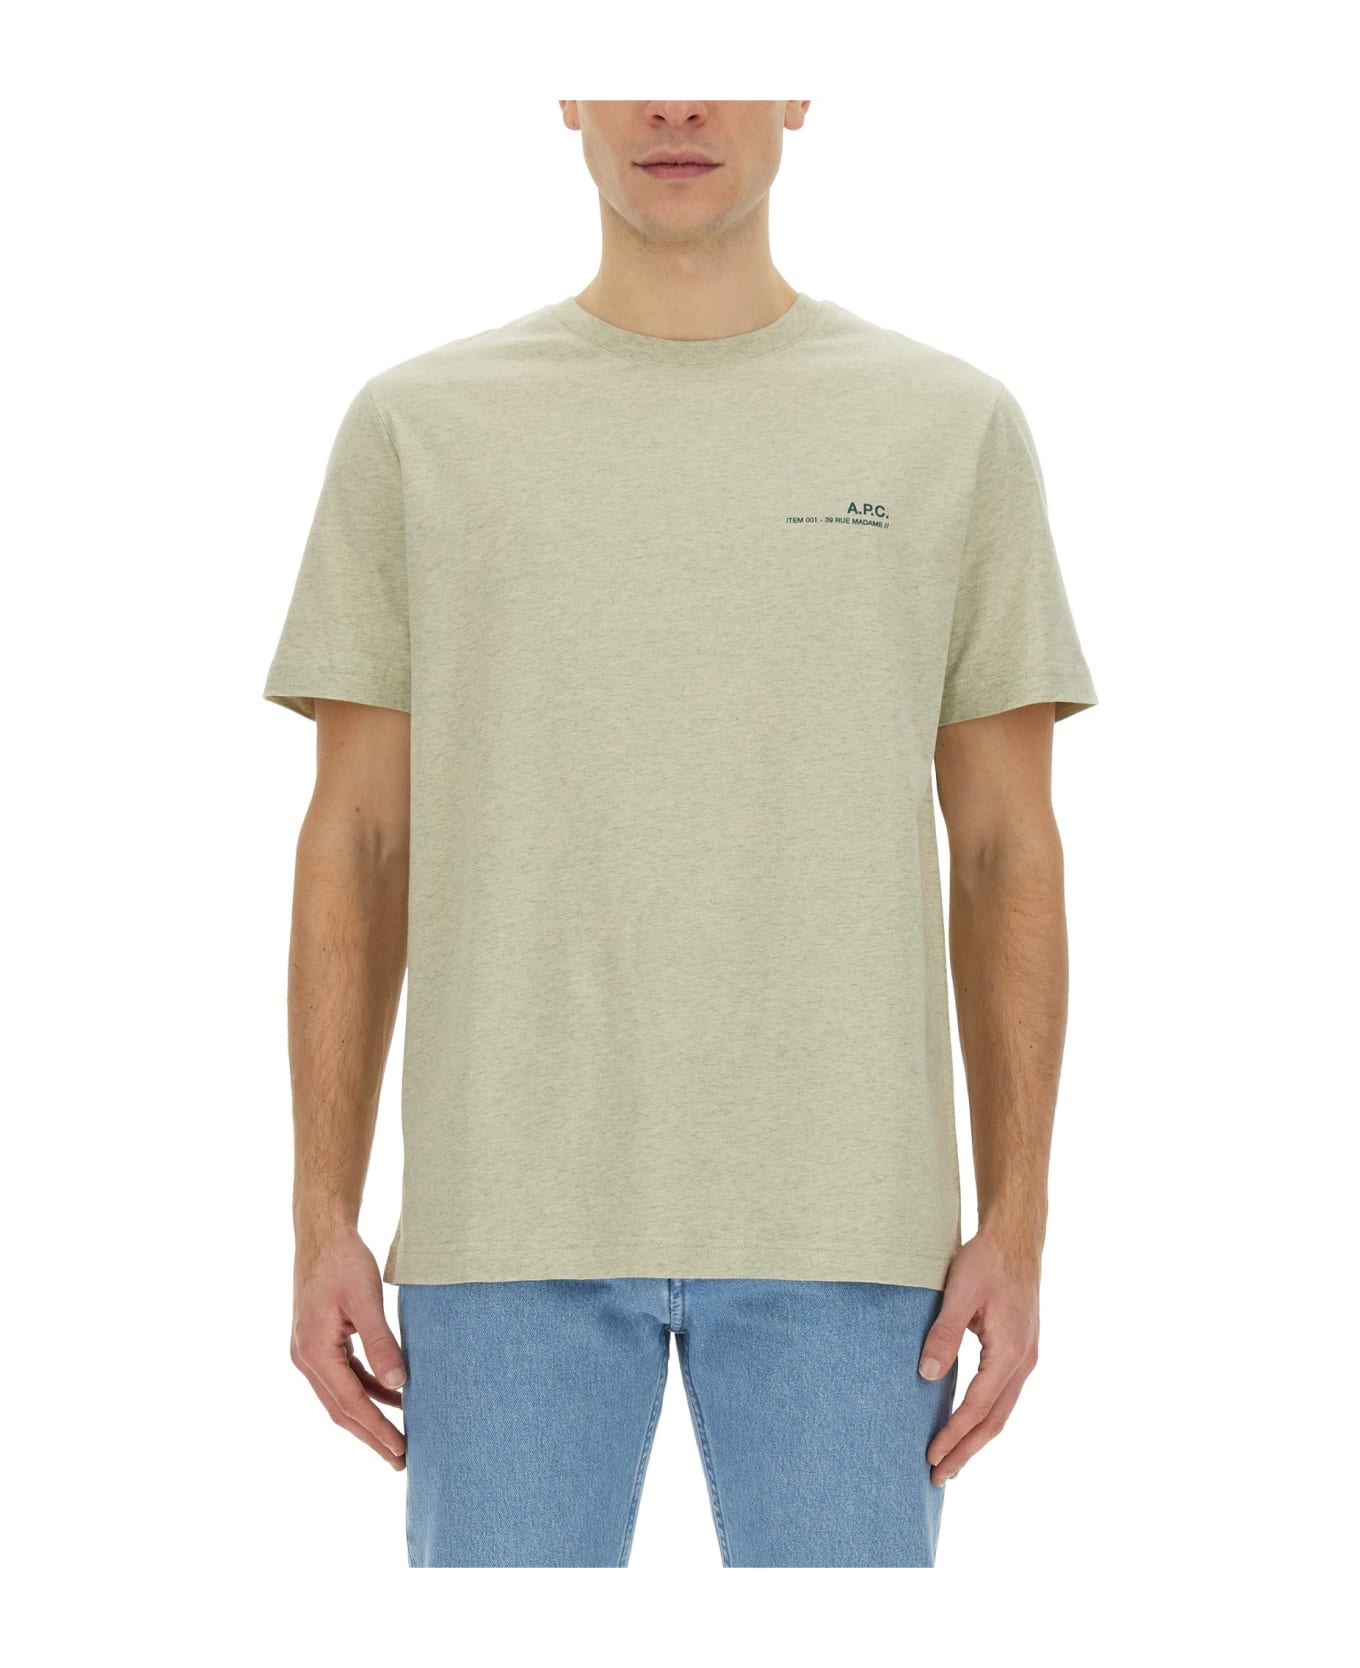 A.P.C. T-shirt With Logo - Pkc Vert Pale Chine シャツ